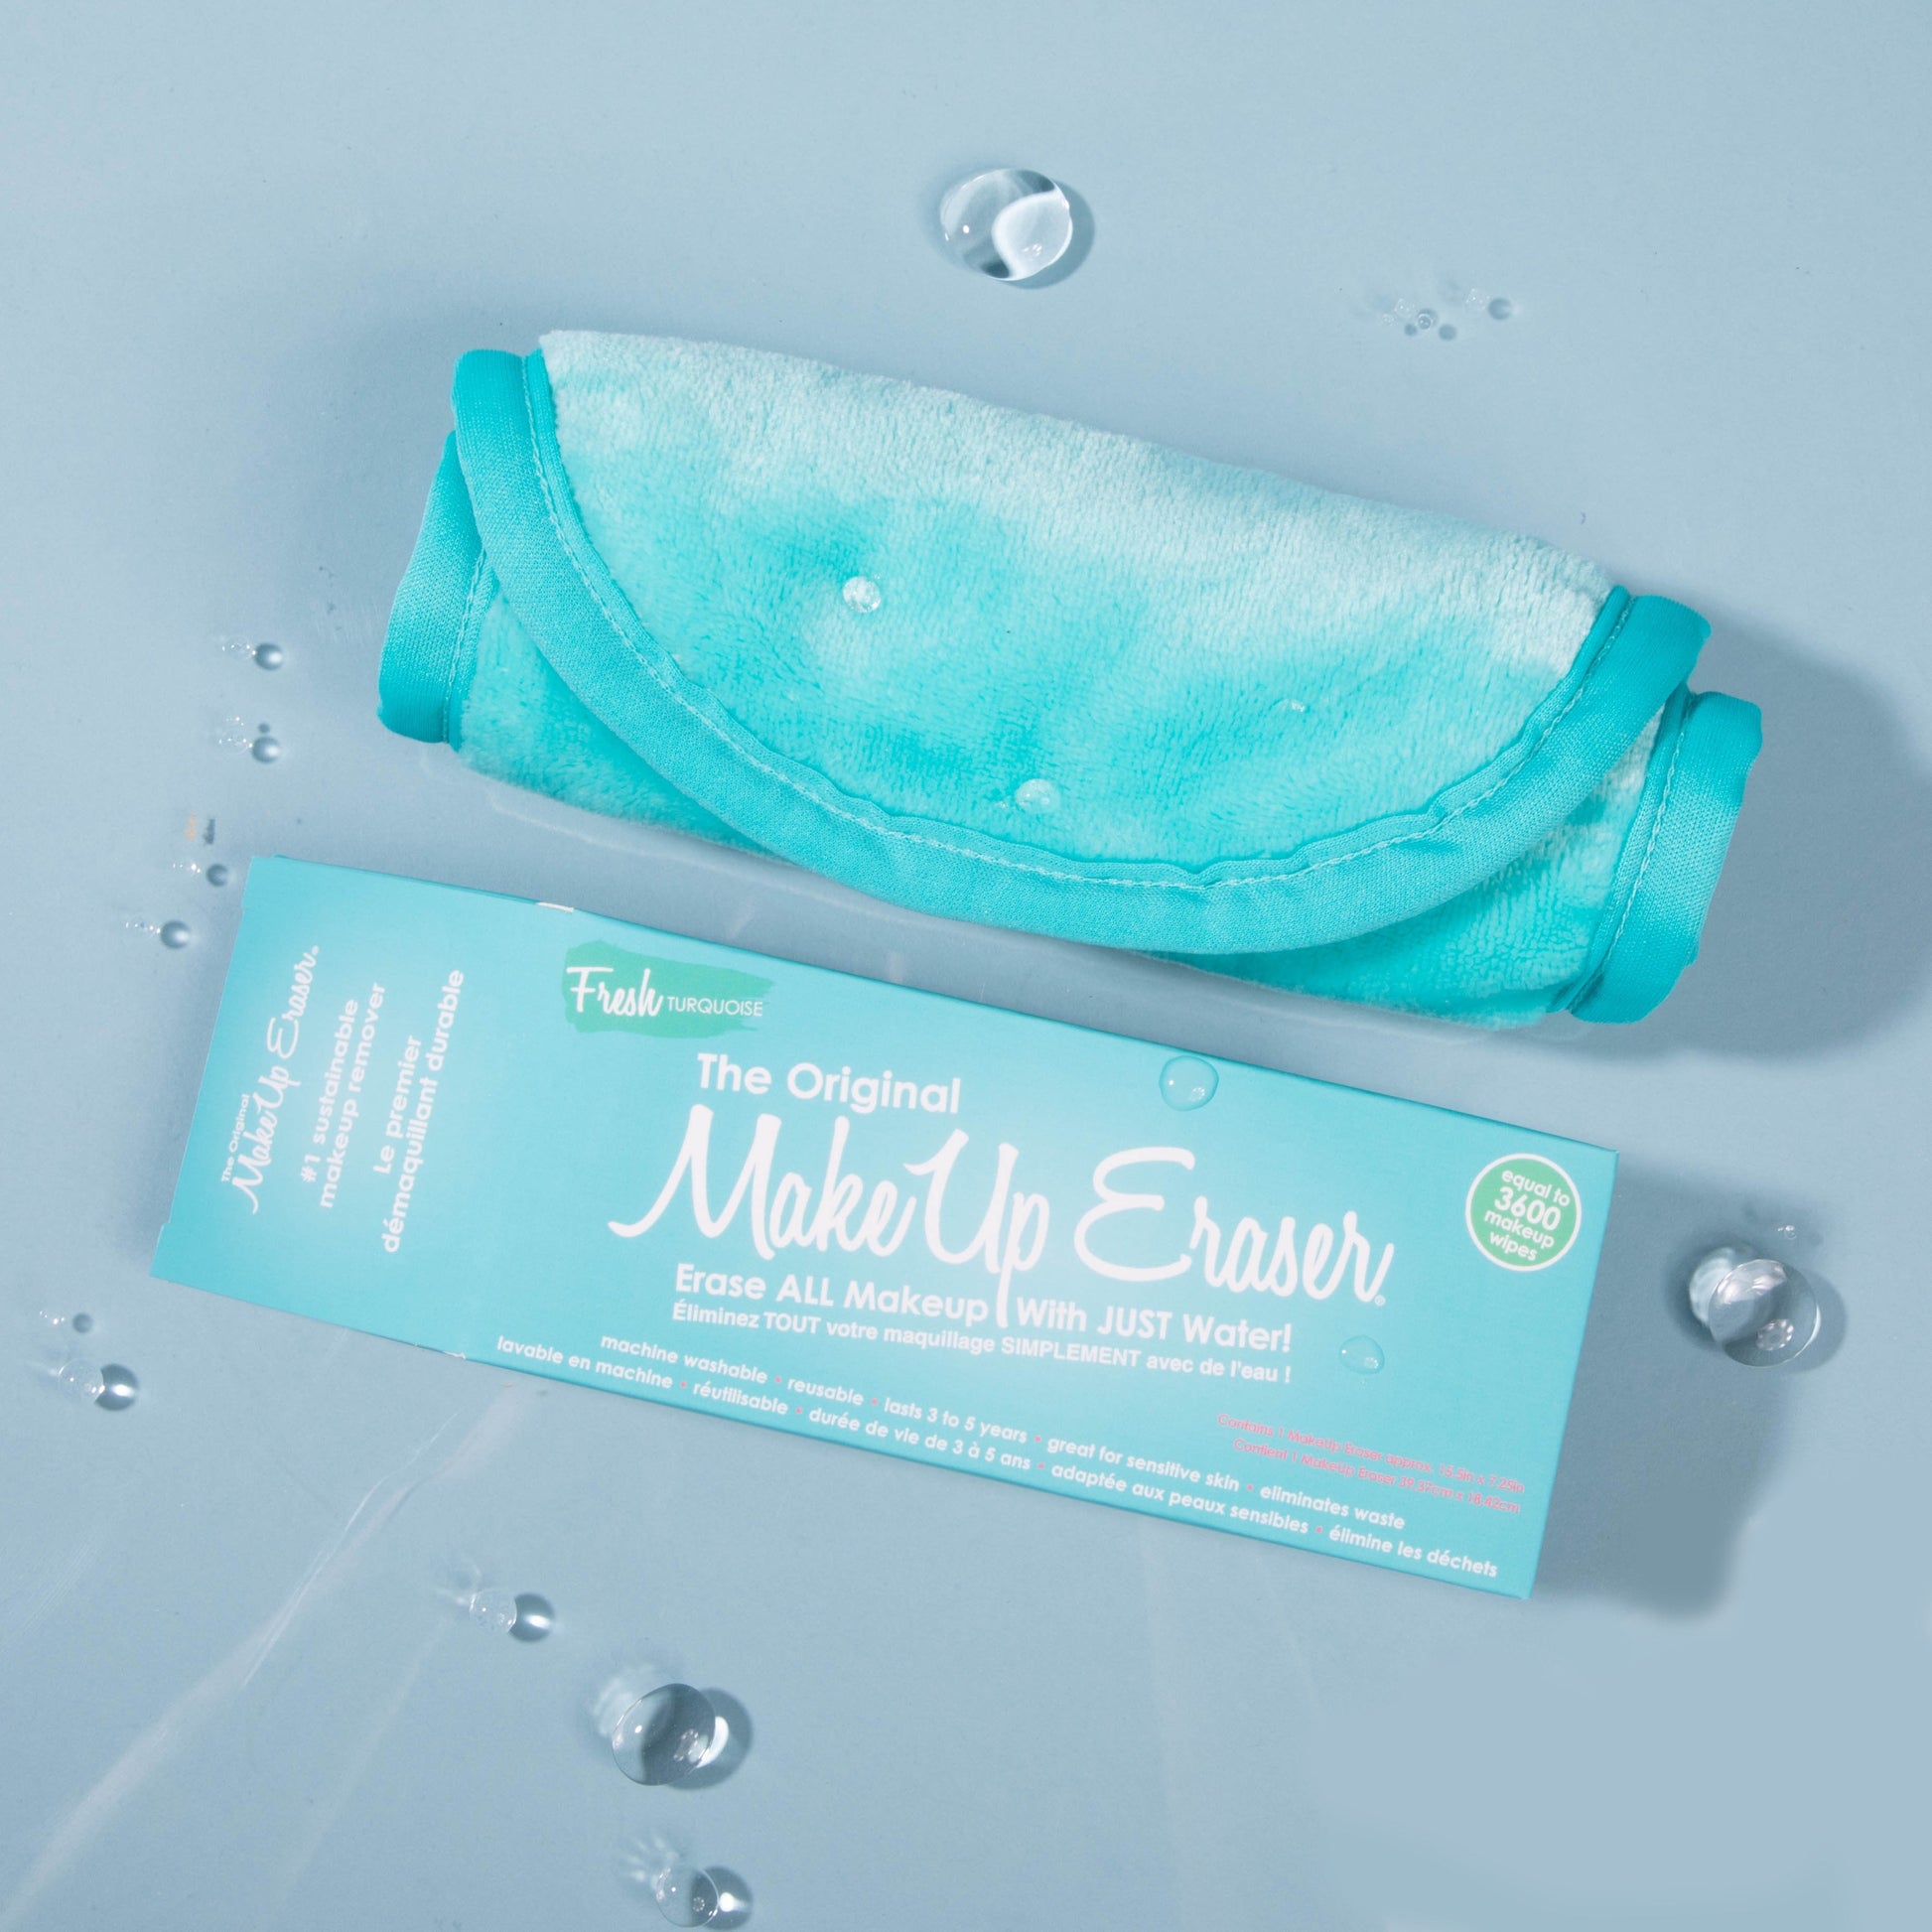 Rolled up Fresh Turquoise MakeUp Eraser next to packaging surrounded by water drops.